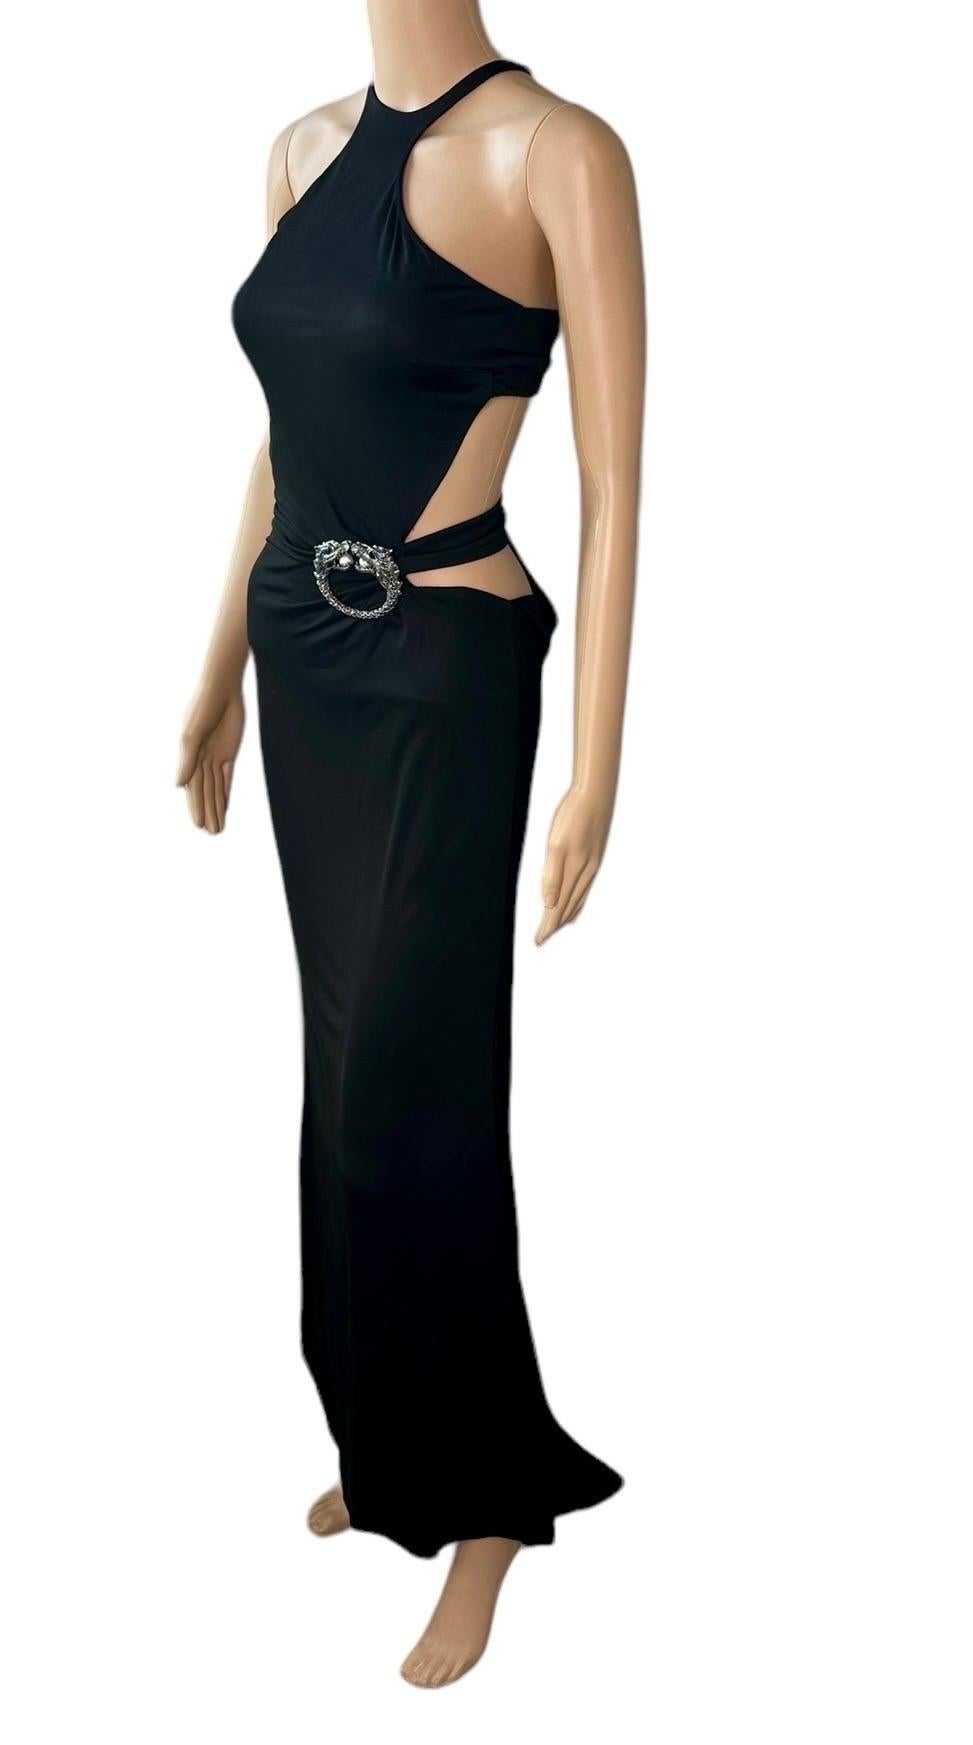 Tom Ford for Gucci F/W 2004 Embellished Plunging Cutout Black Evening Dress Gown 7